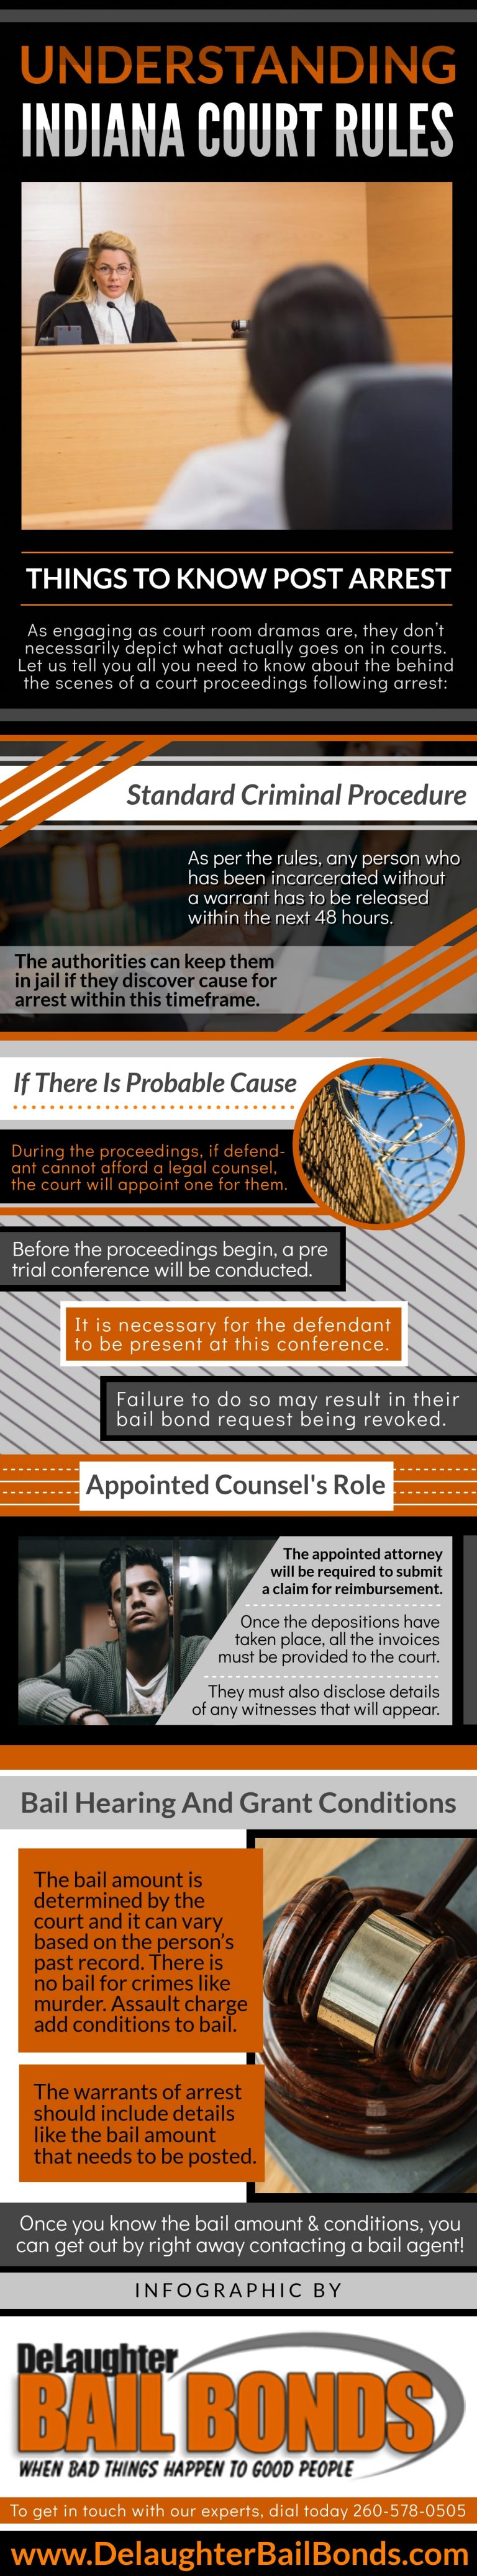 Understanding Indiana Court Rules Infographic DeLaughter Bail Bonds